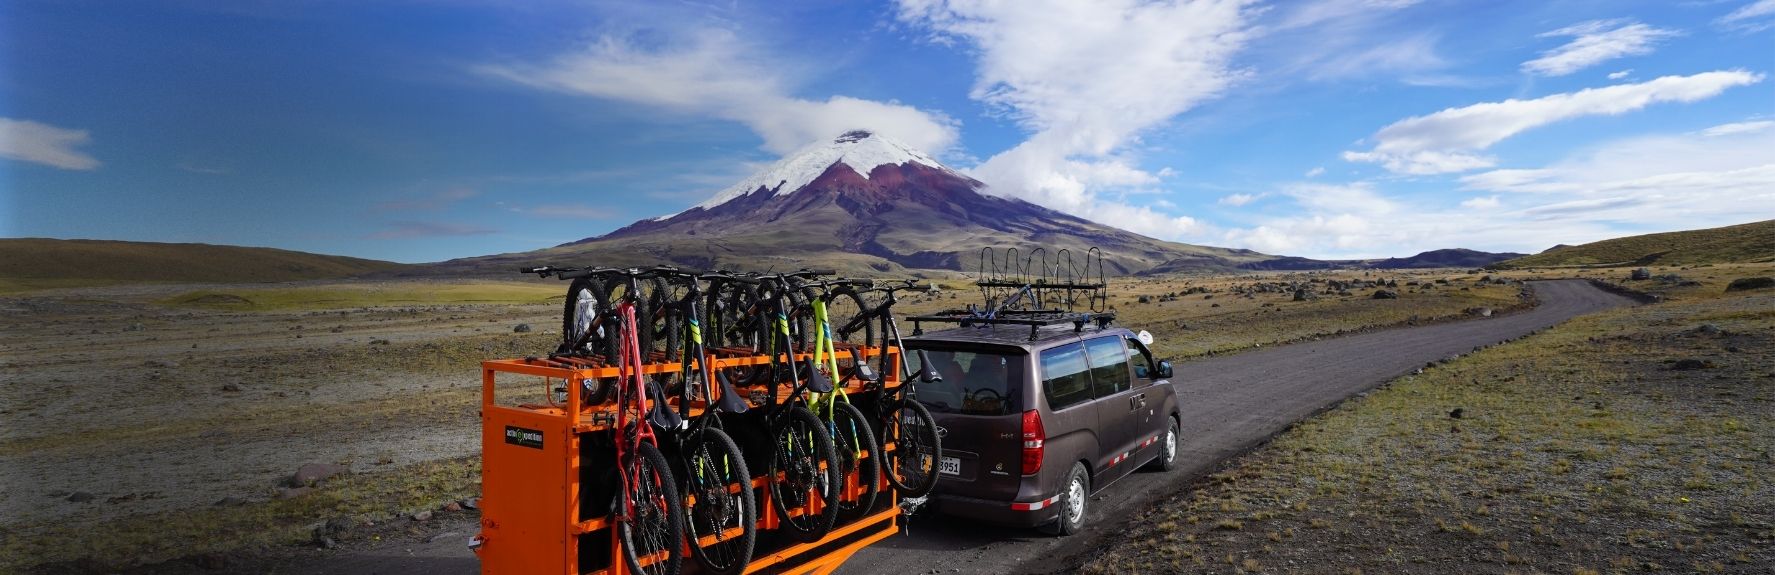 Biking Cotopaxi – Shared Small Group Full Day Tour